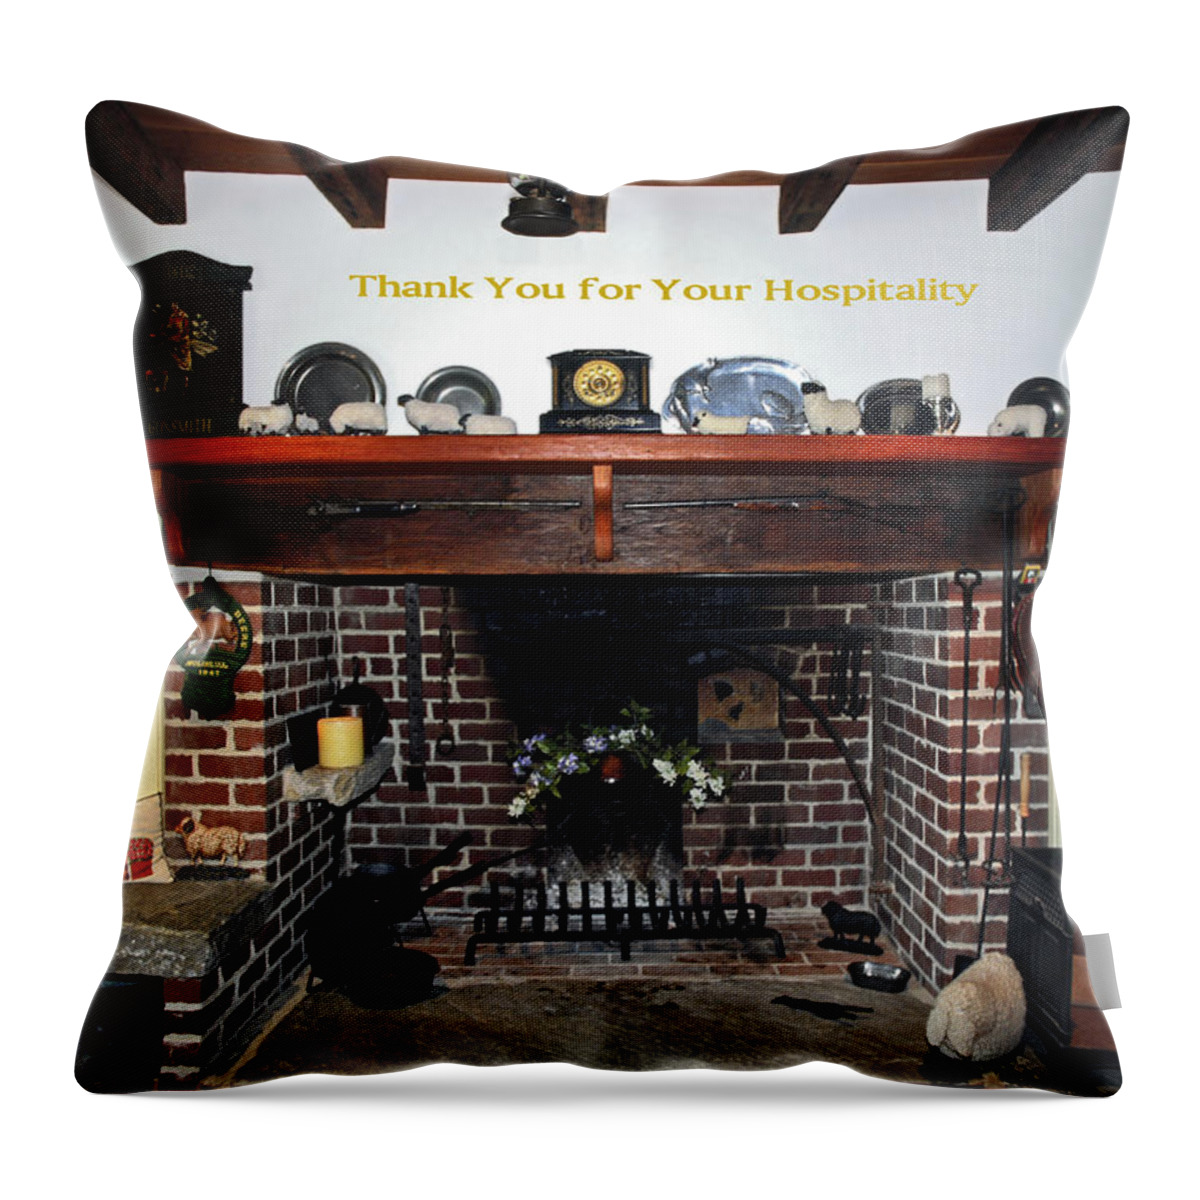 Thank You Throw Pillow featuring the photograph Hospitality #1 by Sally Weigand